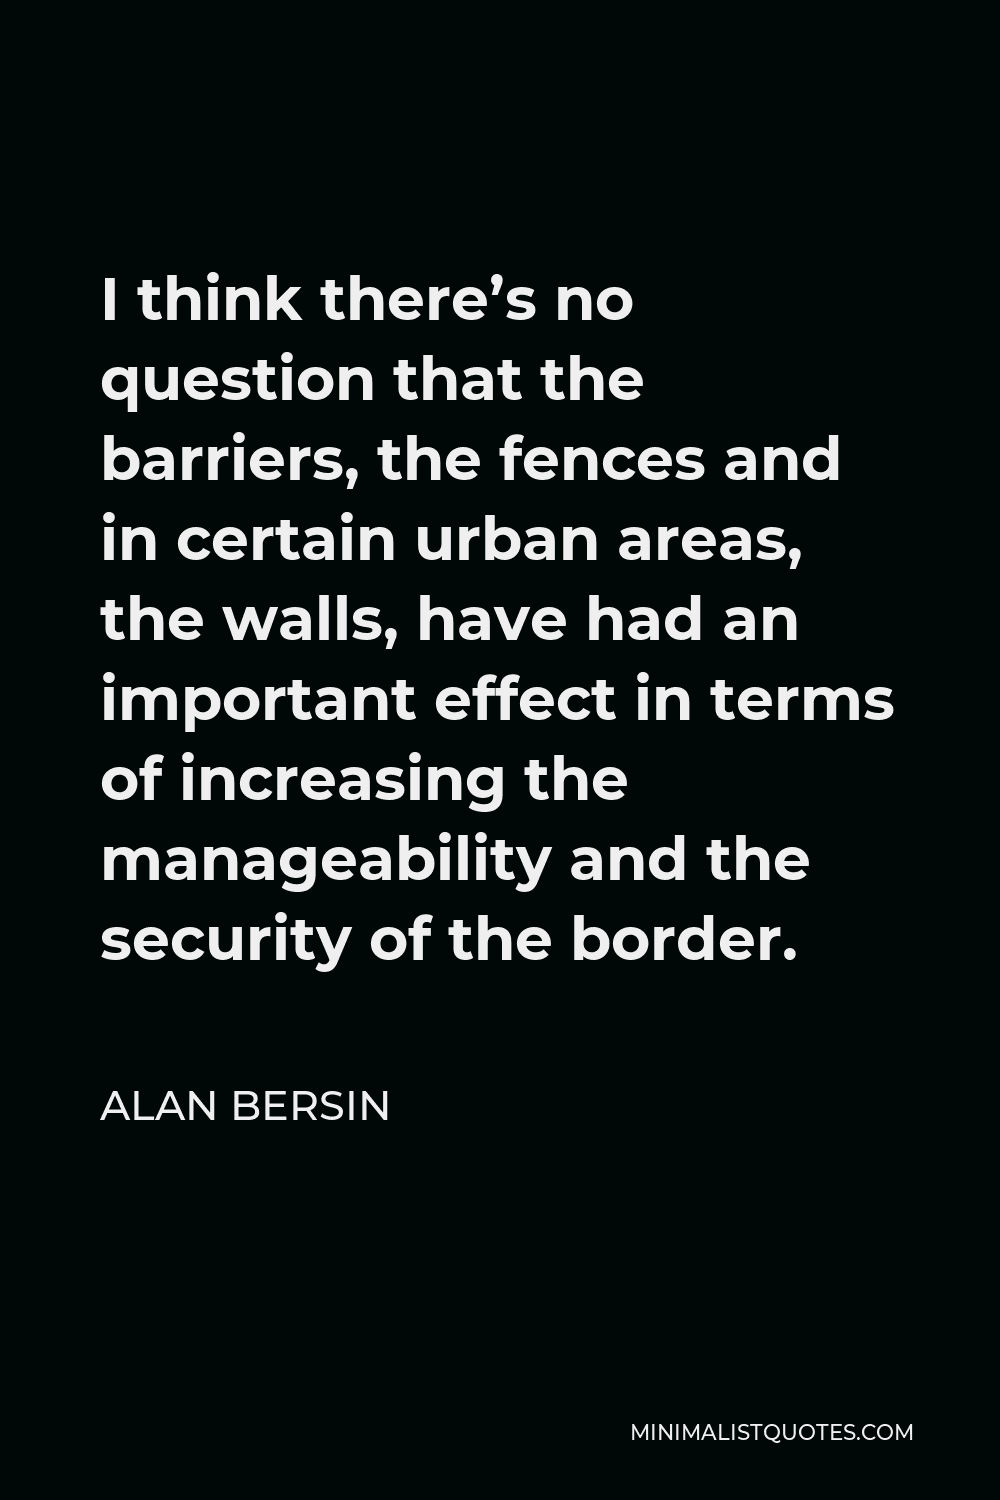 Alan Bersin Quote - I think there’s no question that the barriers, the fences and in certain urban areas, the walls, have had an important effect in terms of increasing the manageability and the security of the border.